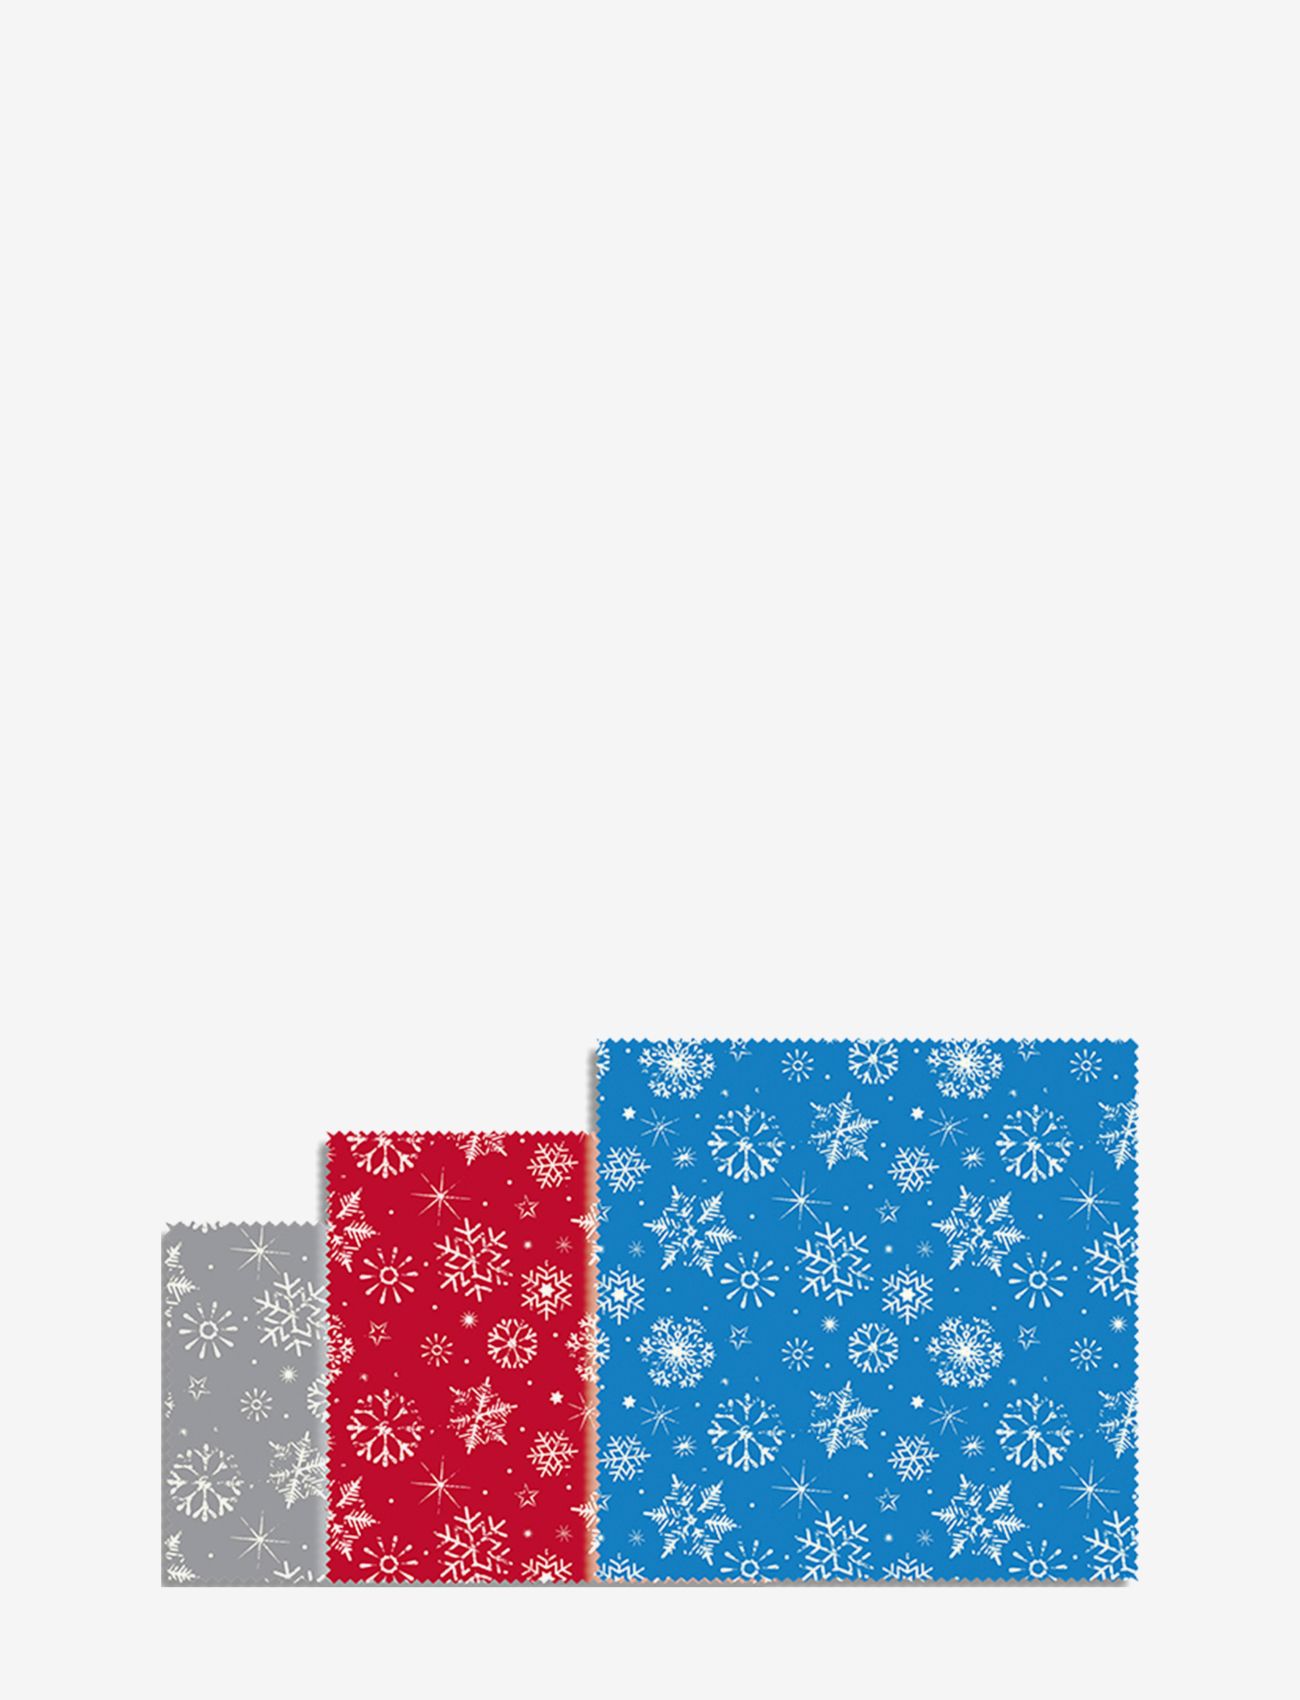 nuts - Beeswax Wraps Winter Edition Set 3 pcs - lowest prices - grey, red, blue - 0